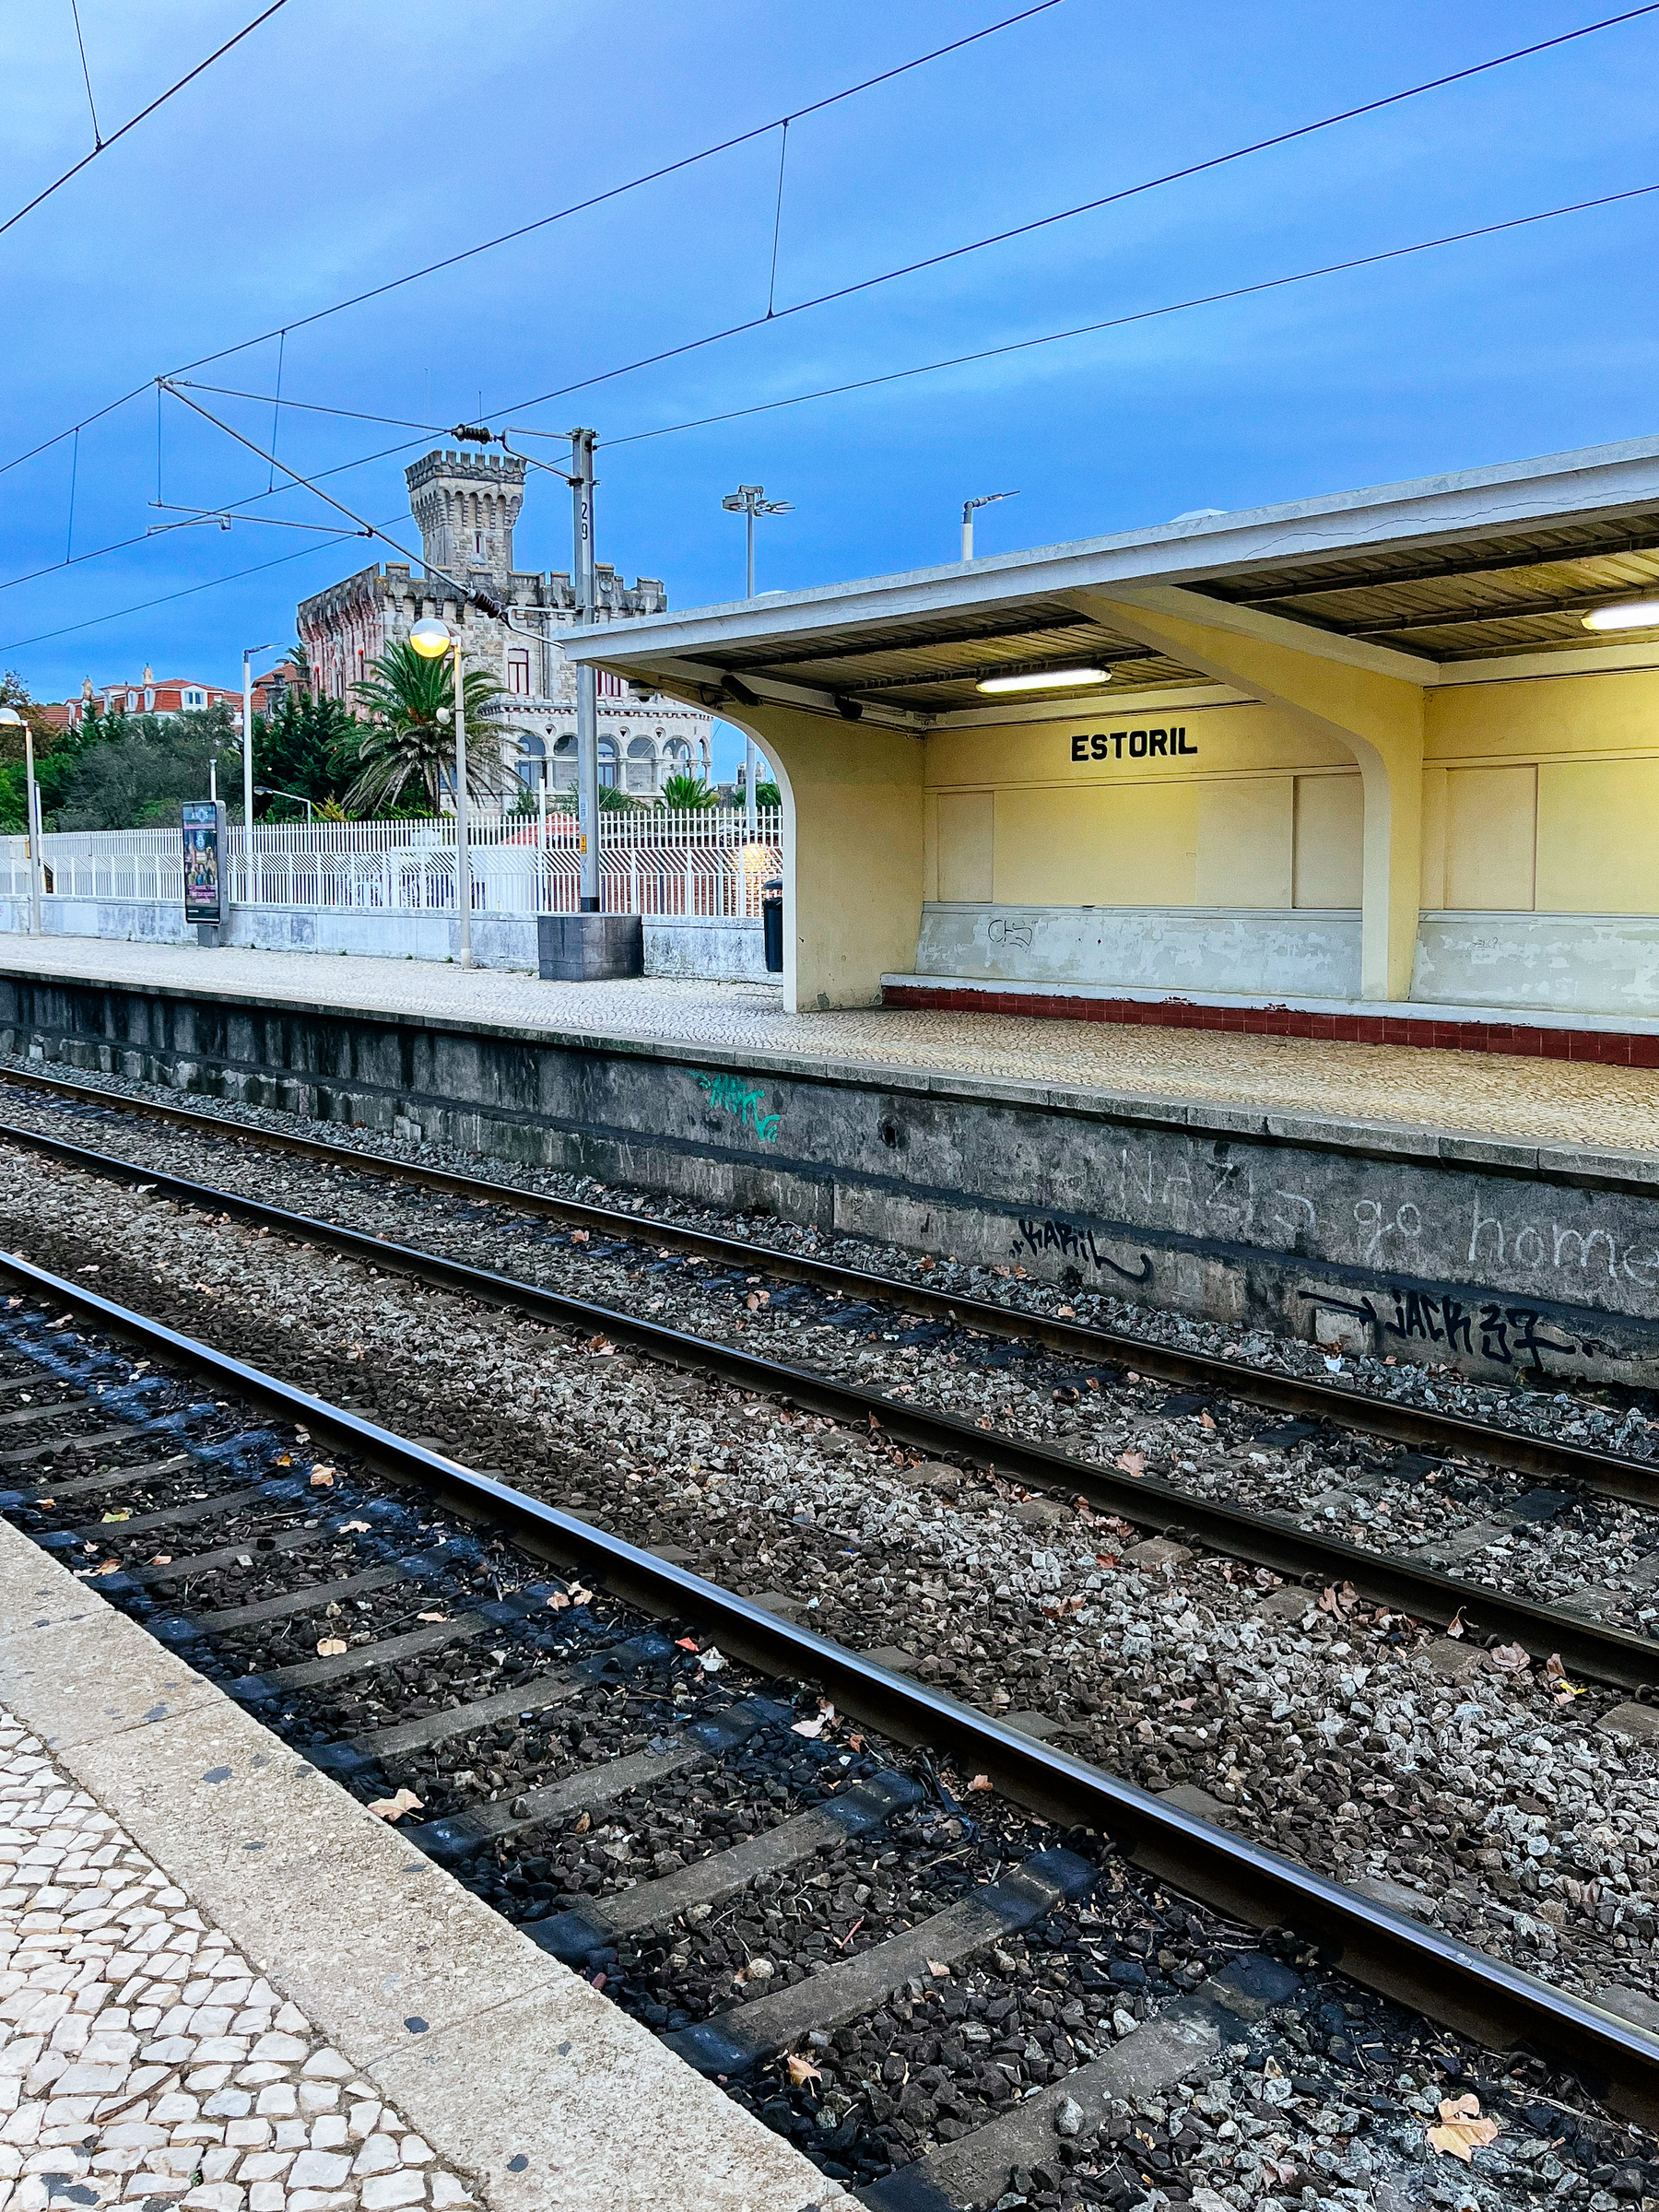 A tiny castle in the distance, train tracks on the foreground. Estoril train station. 